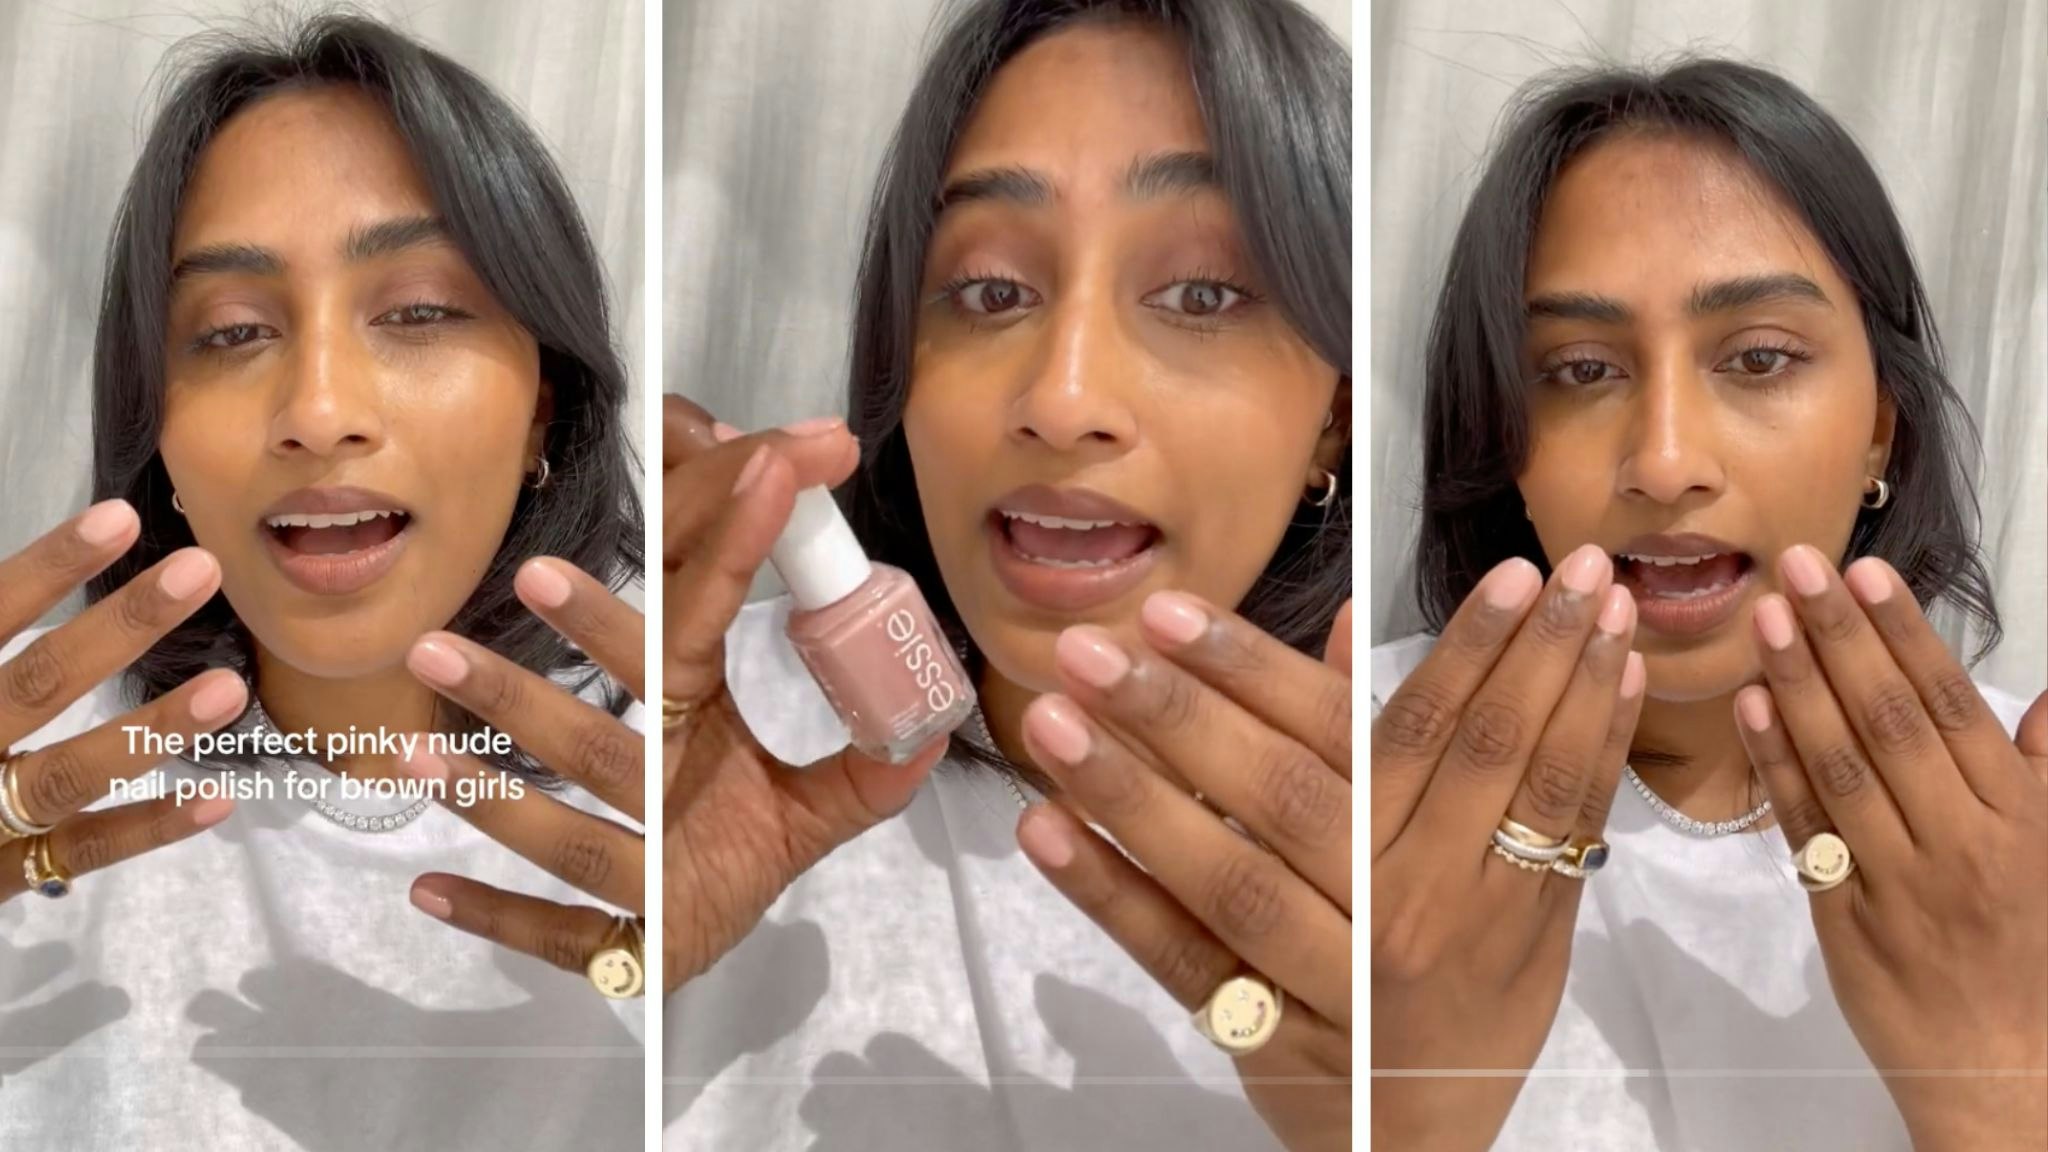 Meet The Perfect Pinky Nude Polish For Brown Girls